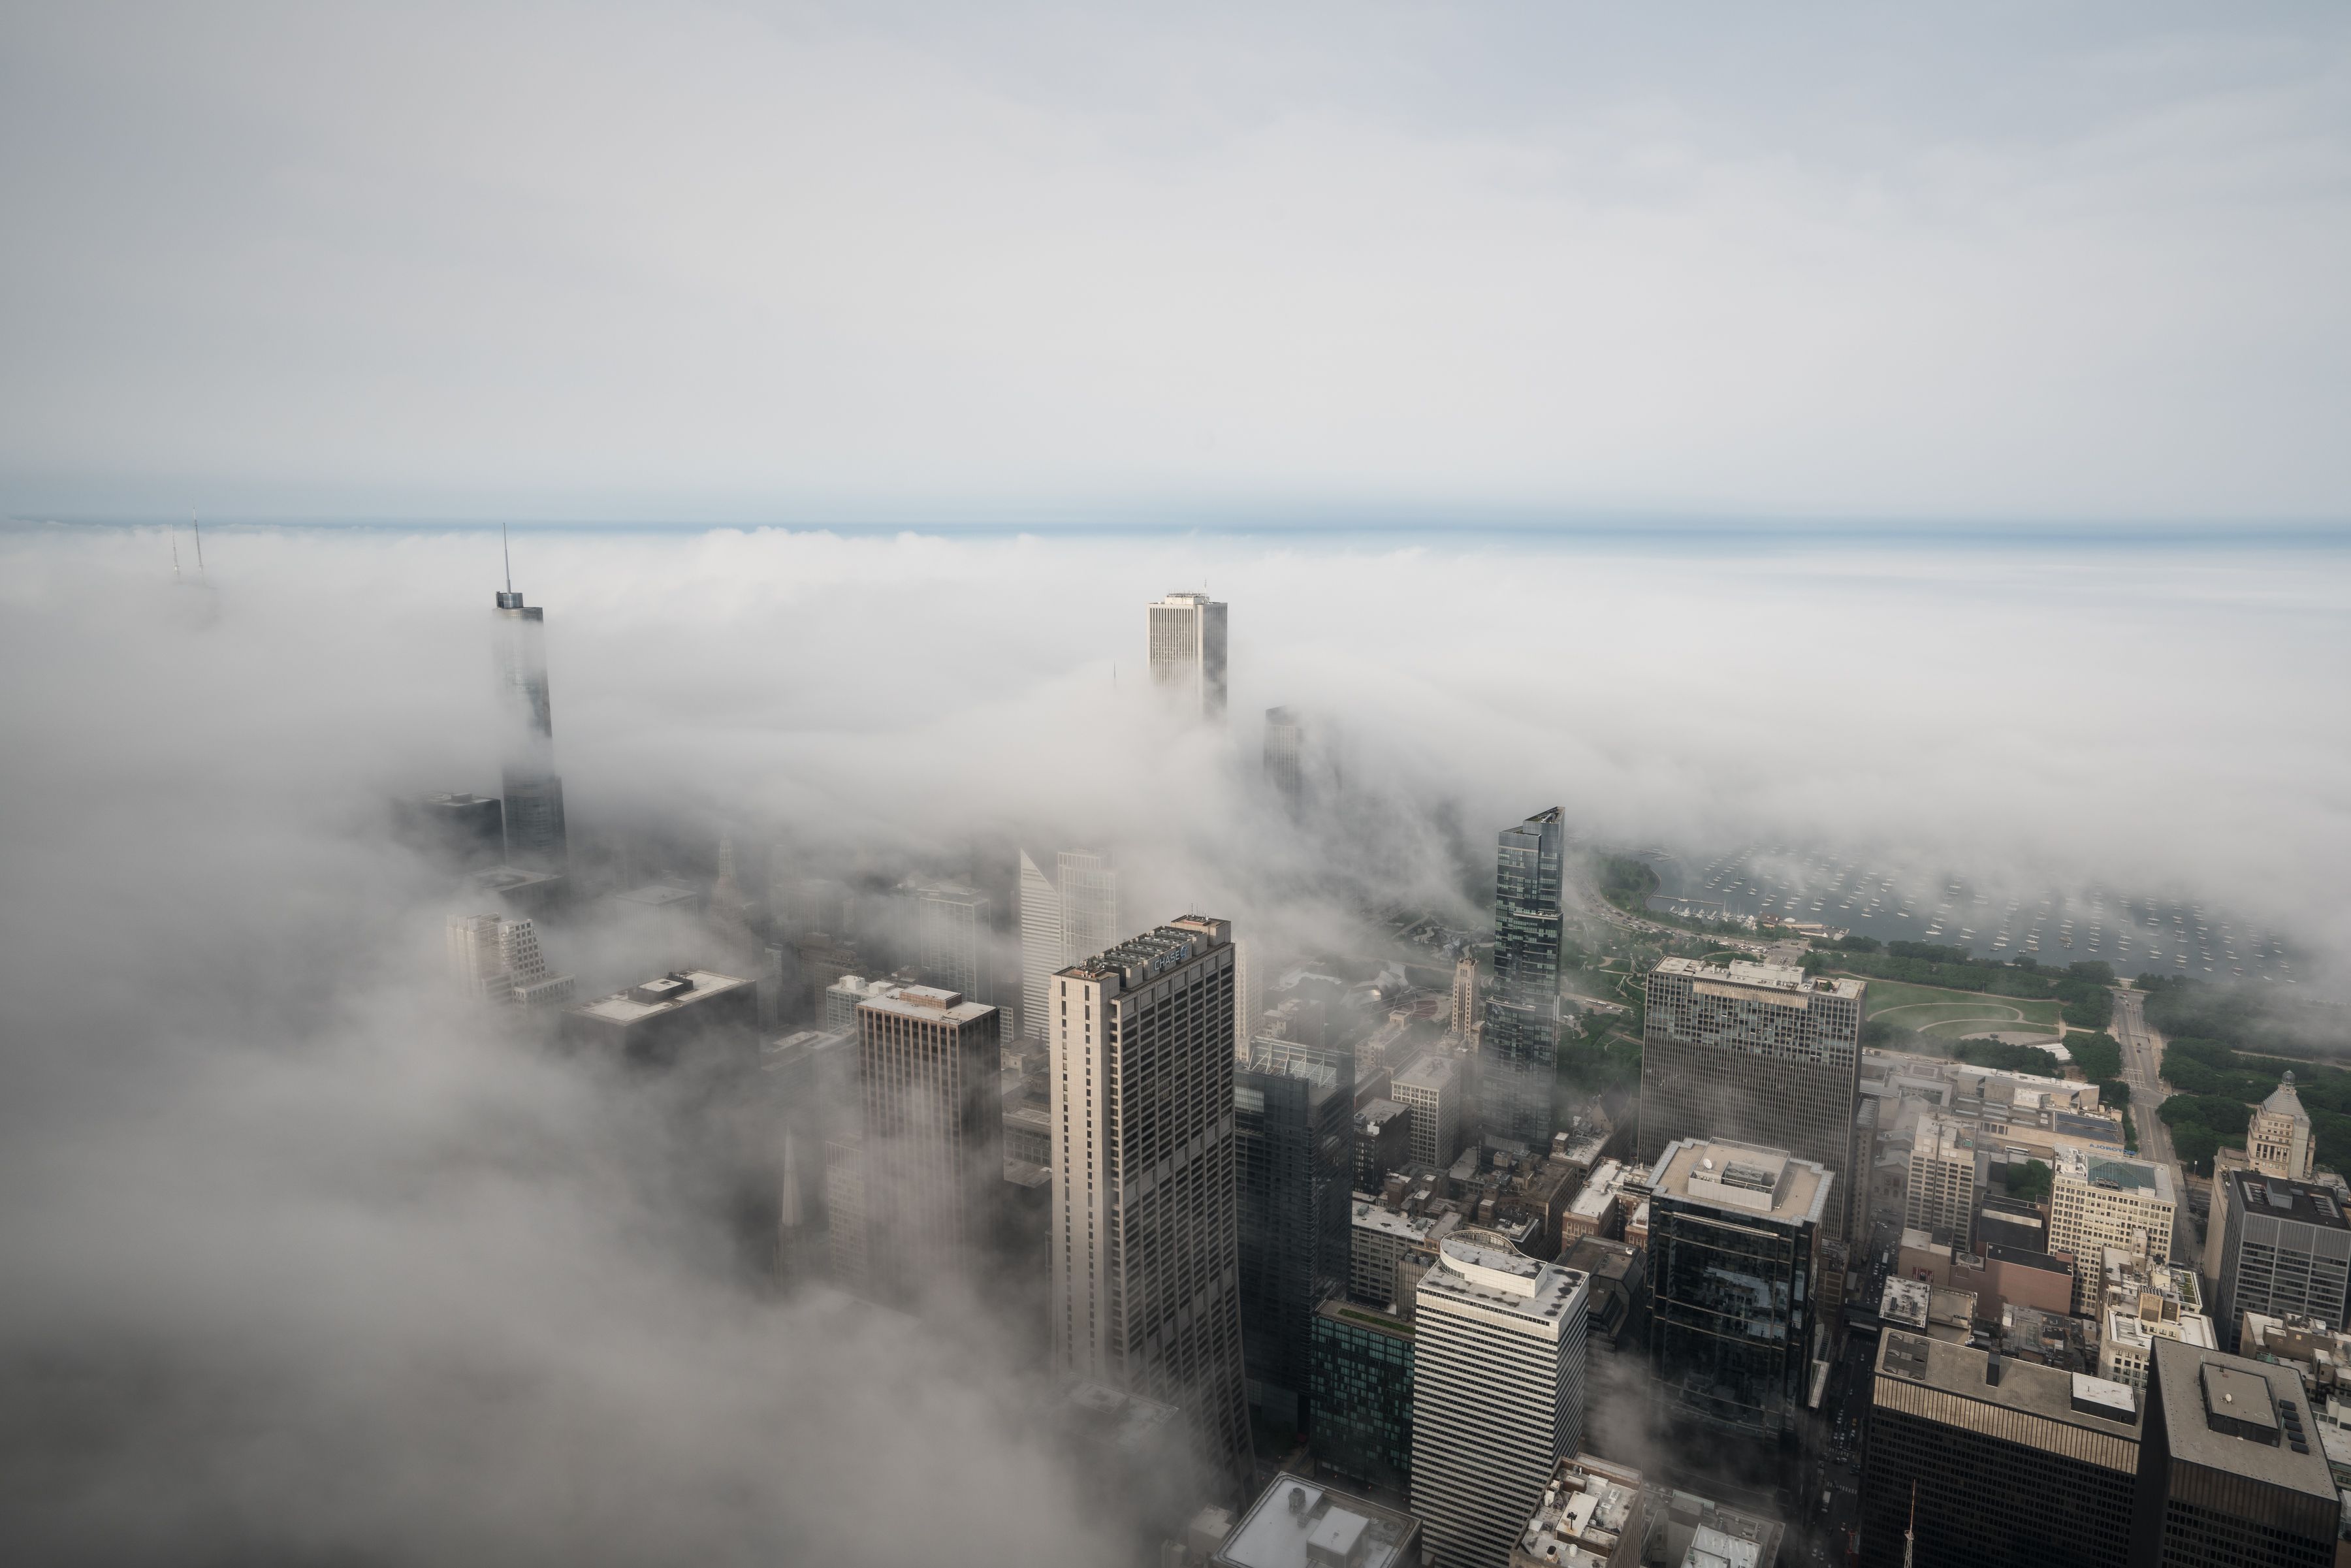 Tatyana Perreault captures the fog grazing the Chicago skyscrapers